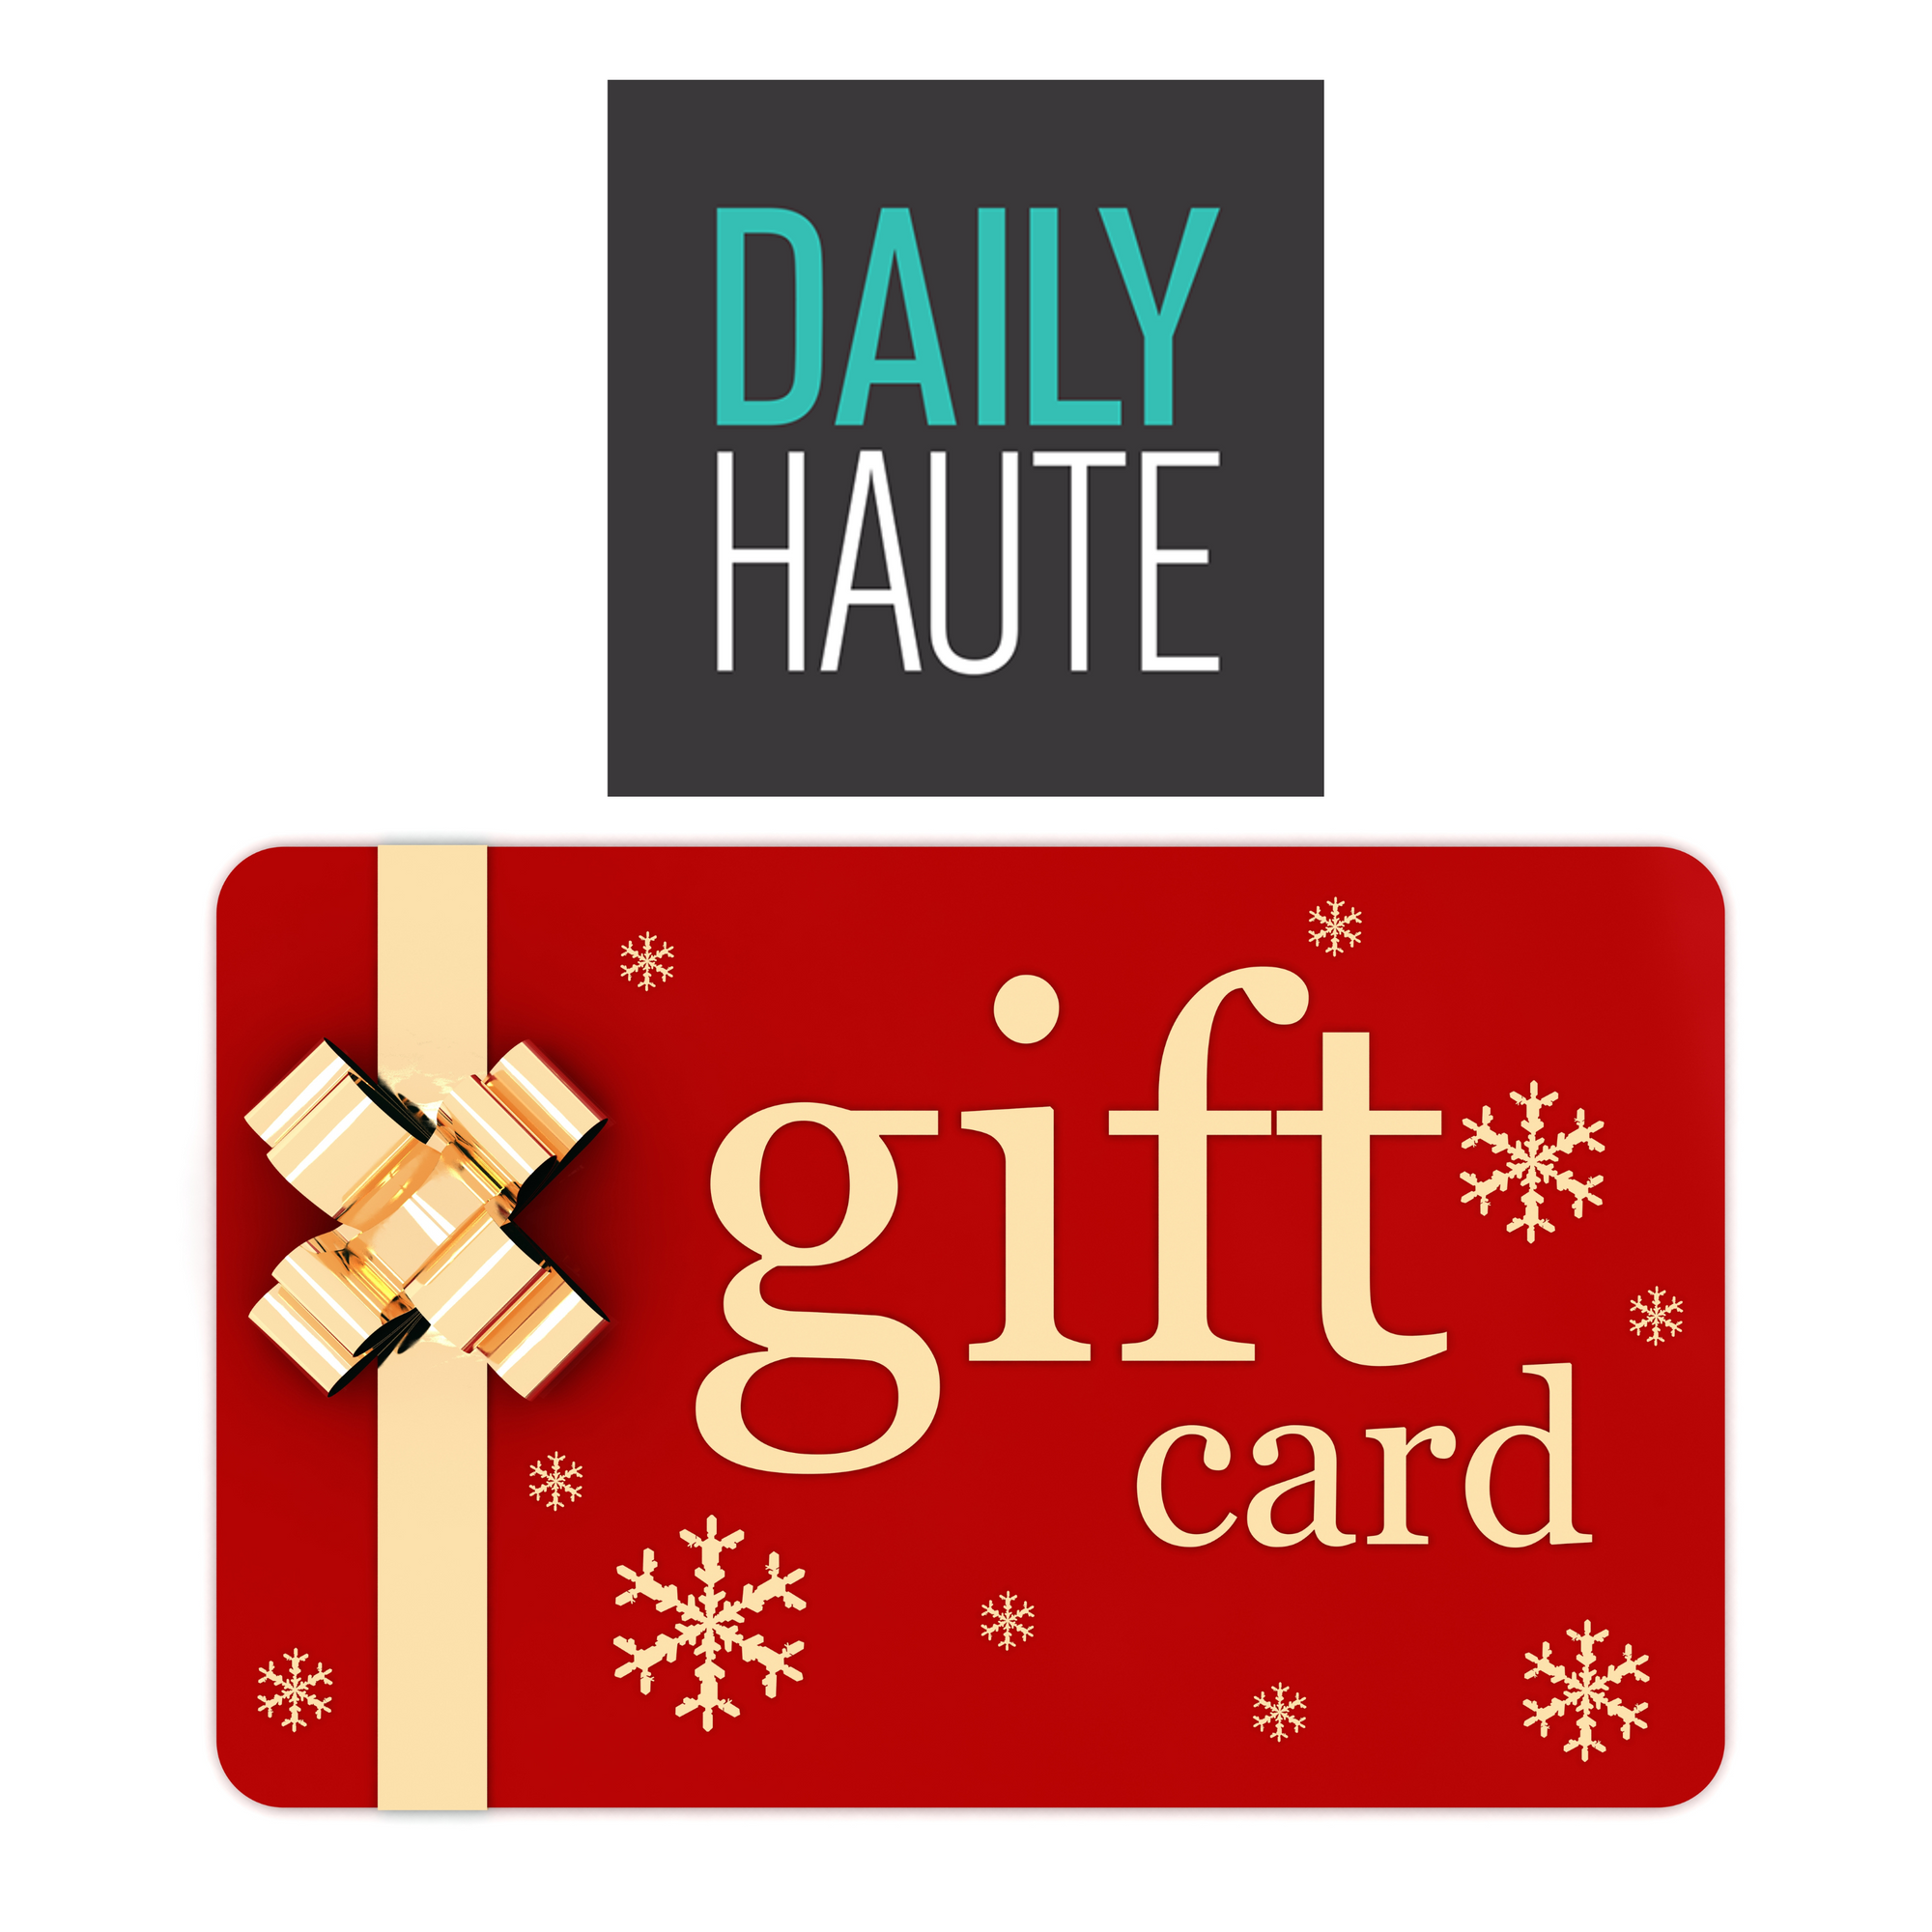 Daily Haute Gift Card